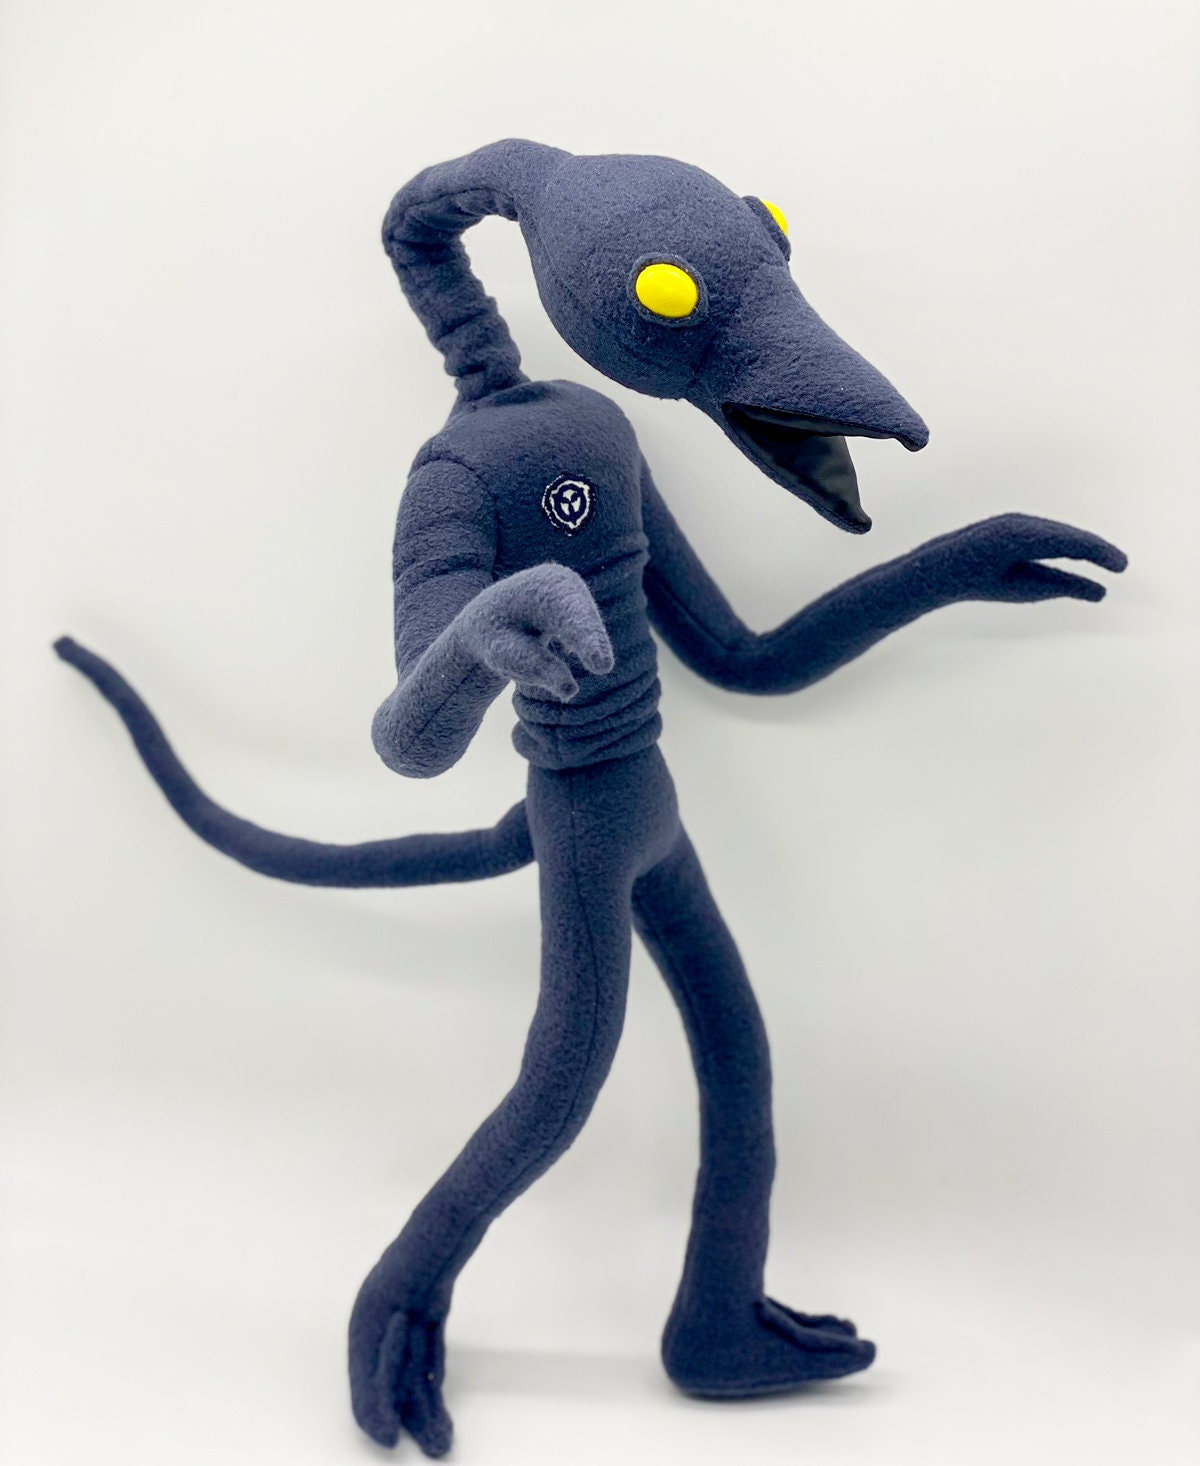 SCP-173 the Sculpture by Daniel Grissom Hand Drawn SCP Fan 